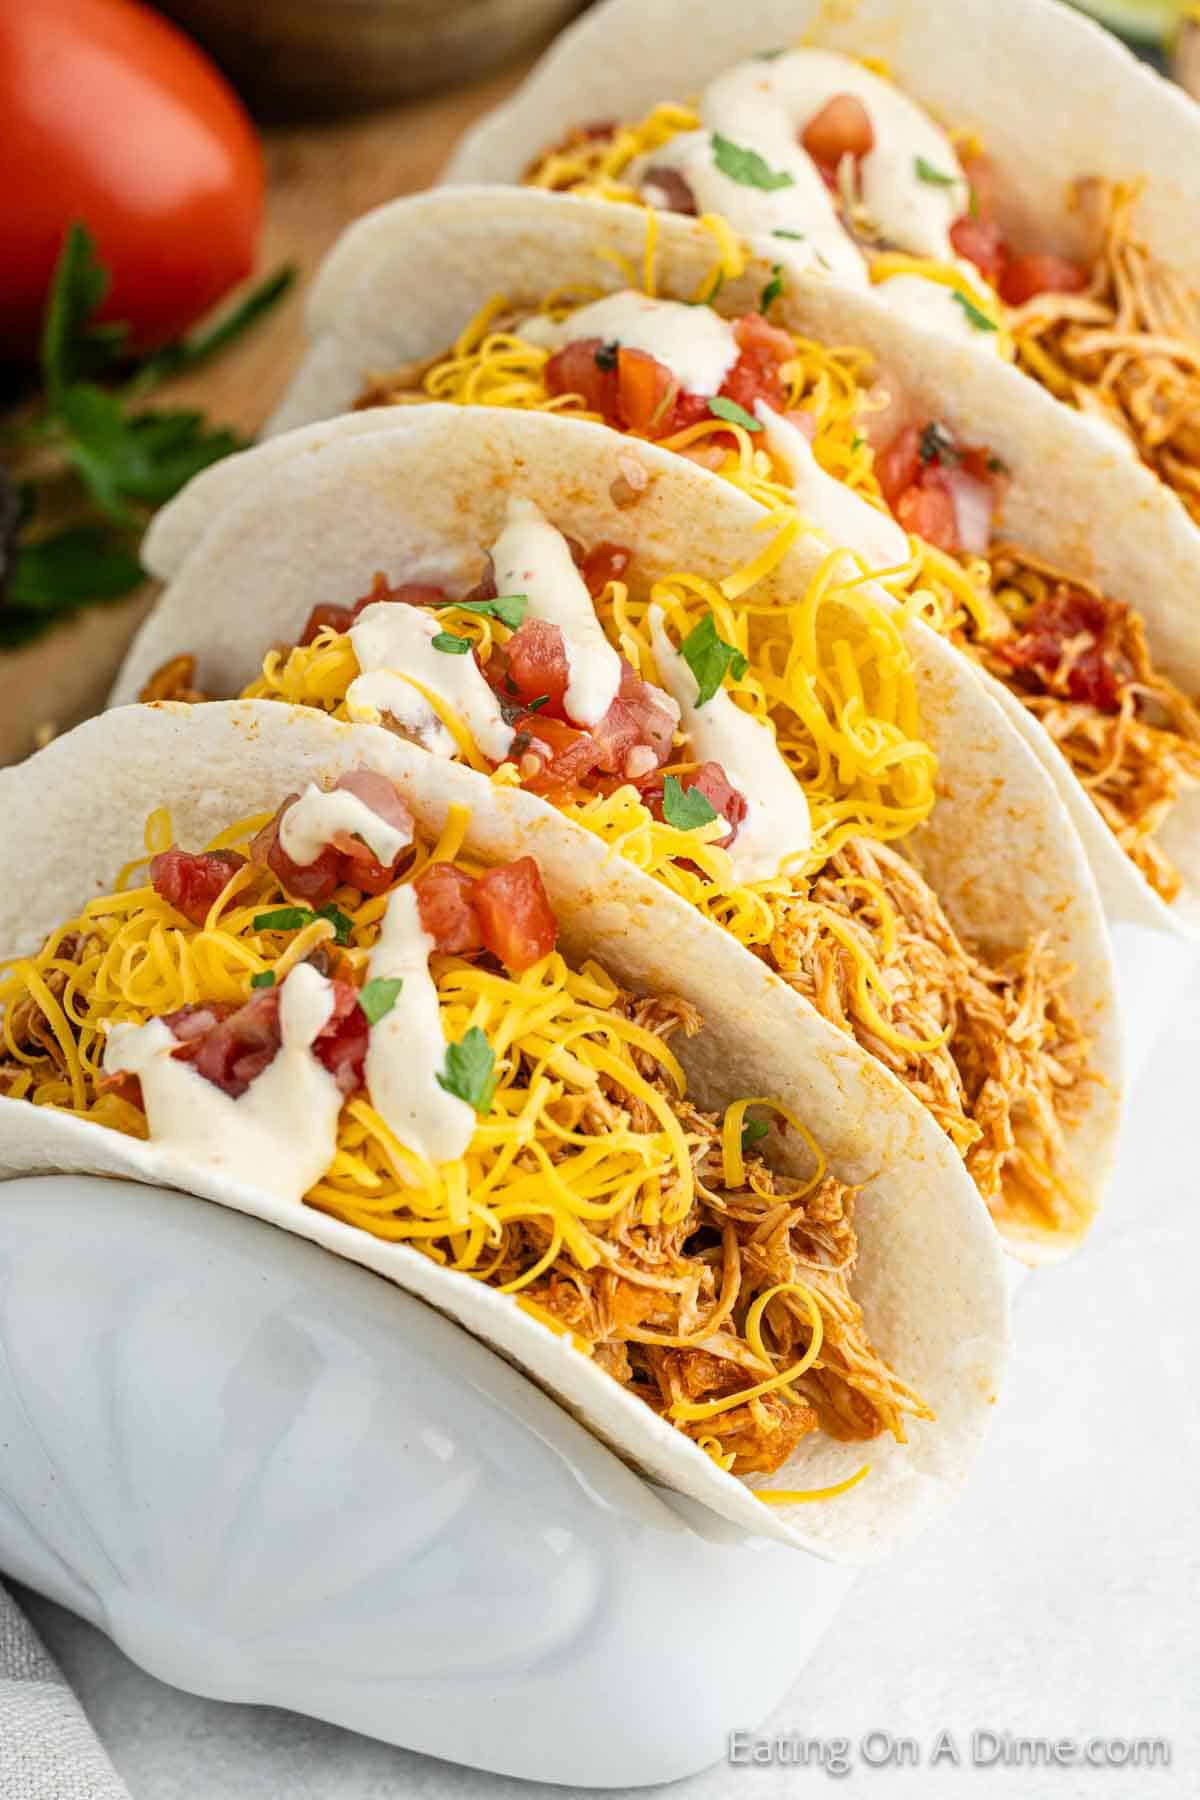 Shredded Chicken tacos in flour tortillas topped with shredded cheese, tomatoes and sour cream